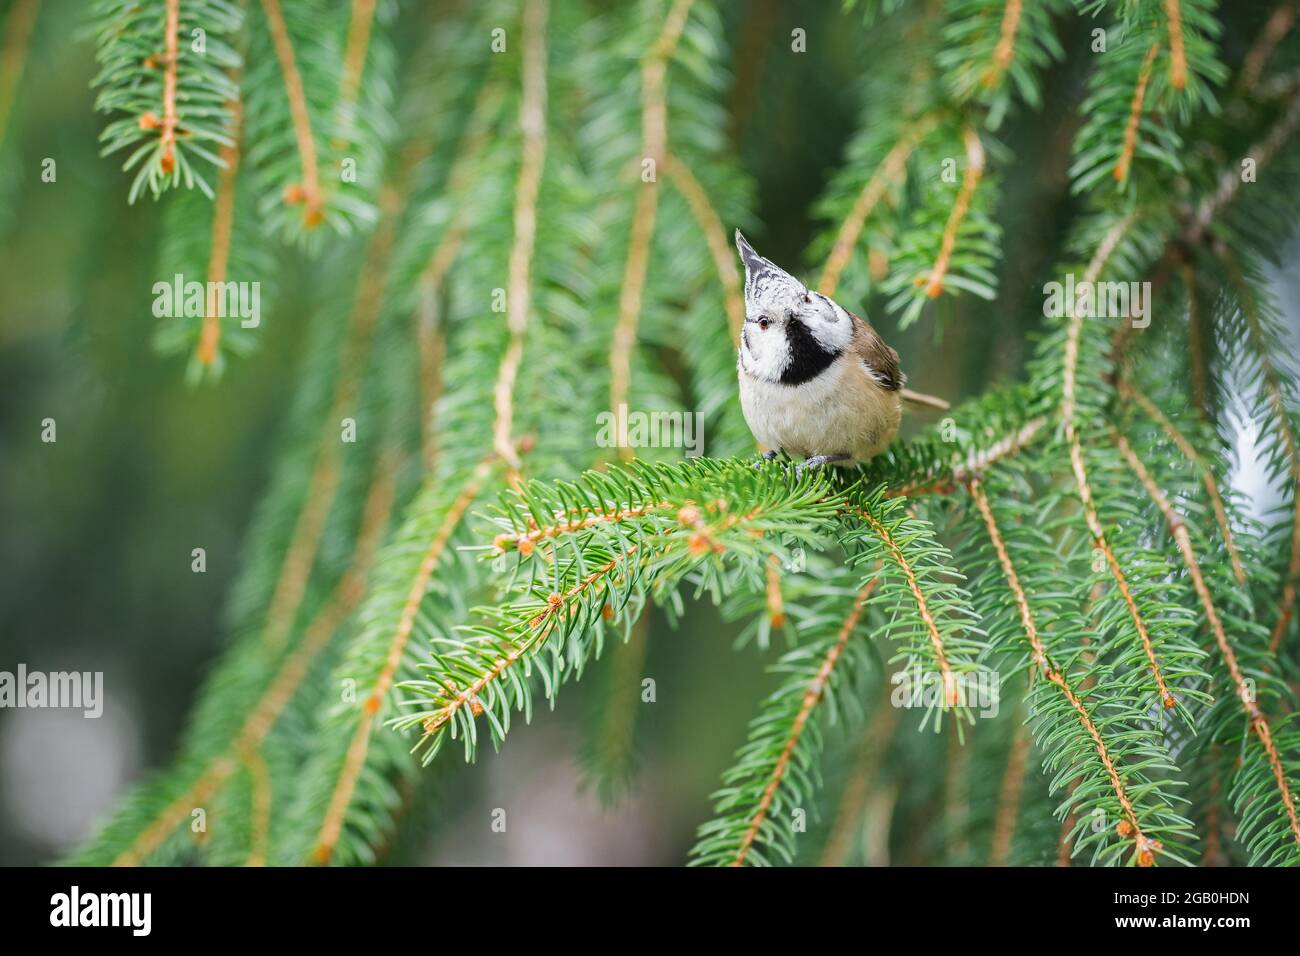 The European crested tit (Lophophanes cristatus) sitting on a coniferous tree branch in the forest. End of winter. Stock Photo